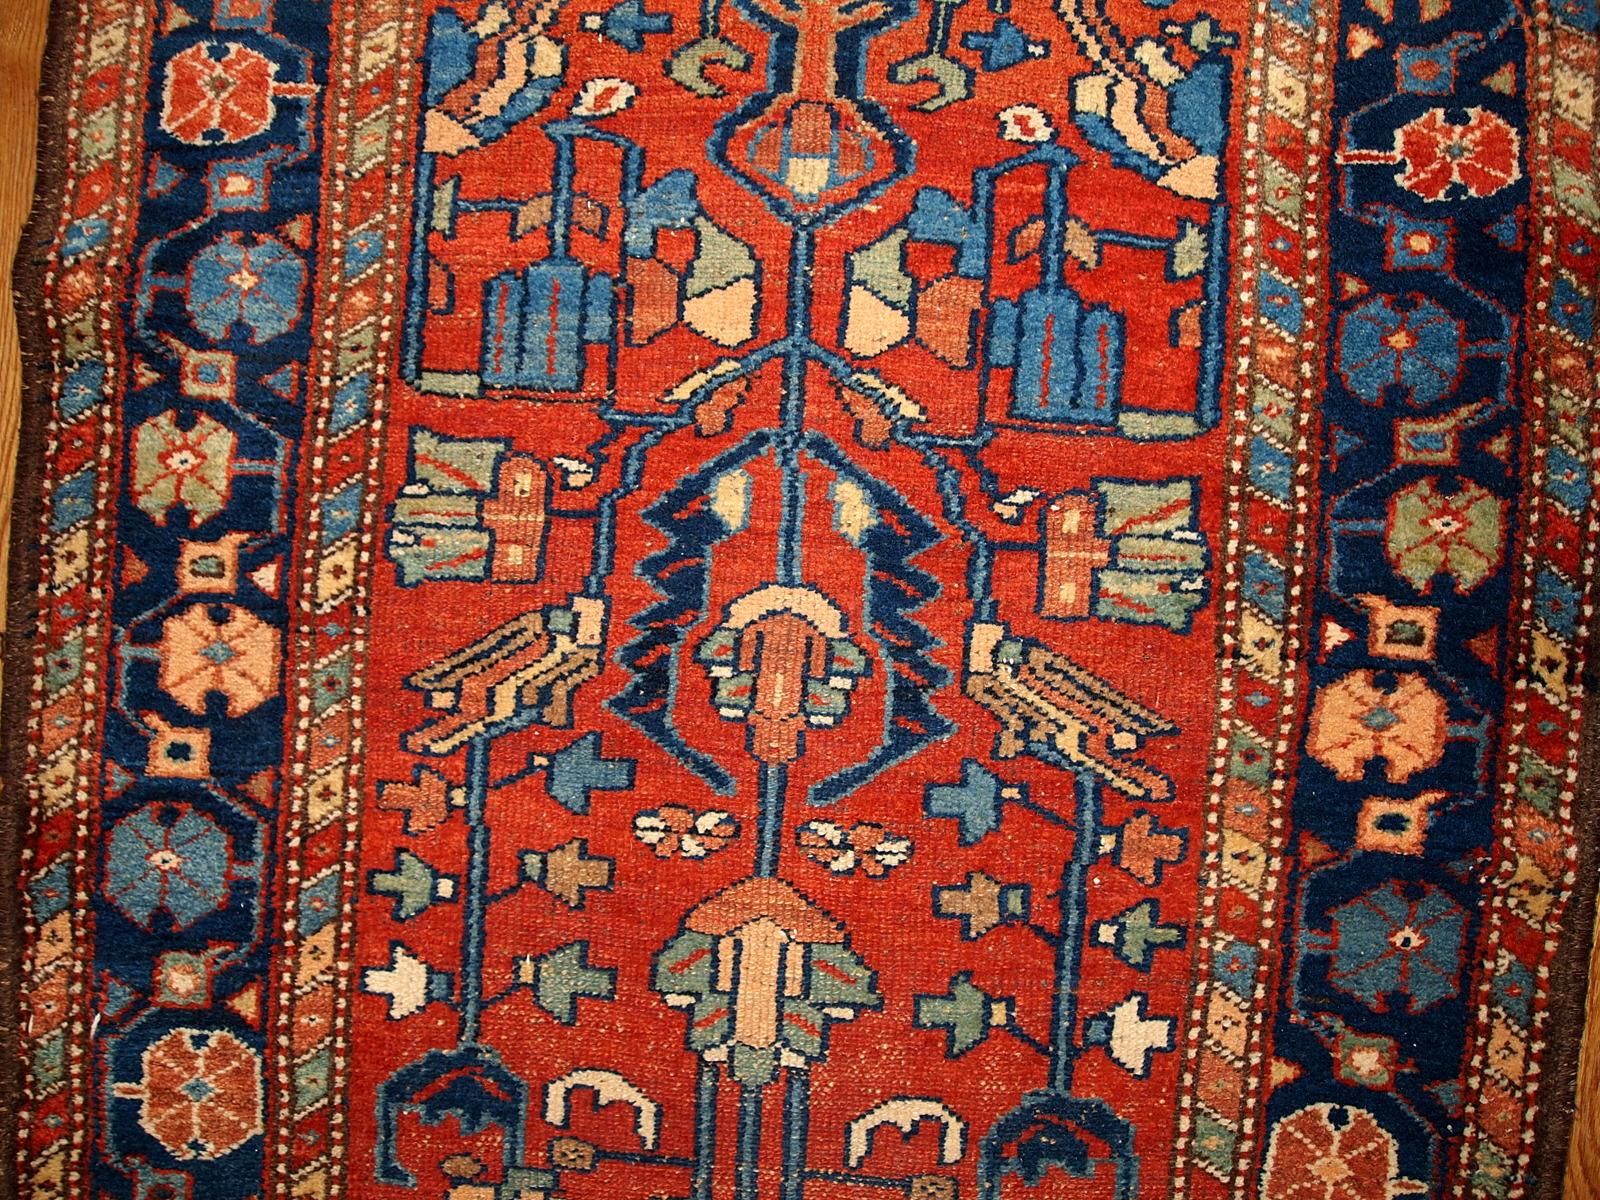 Antique Lilihan style rug in red and blue colours. This runner is from the beginning of 20th century in original good condition. Measures: 3.3' x 10.2' (100cm x 310cm).